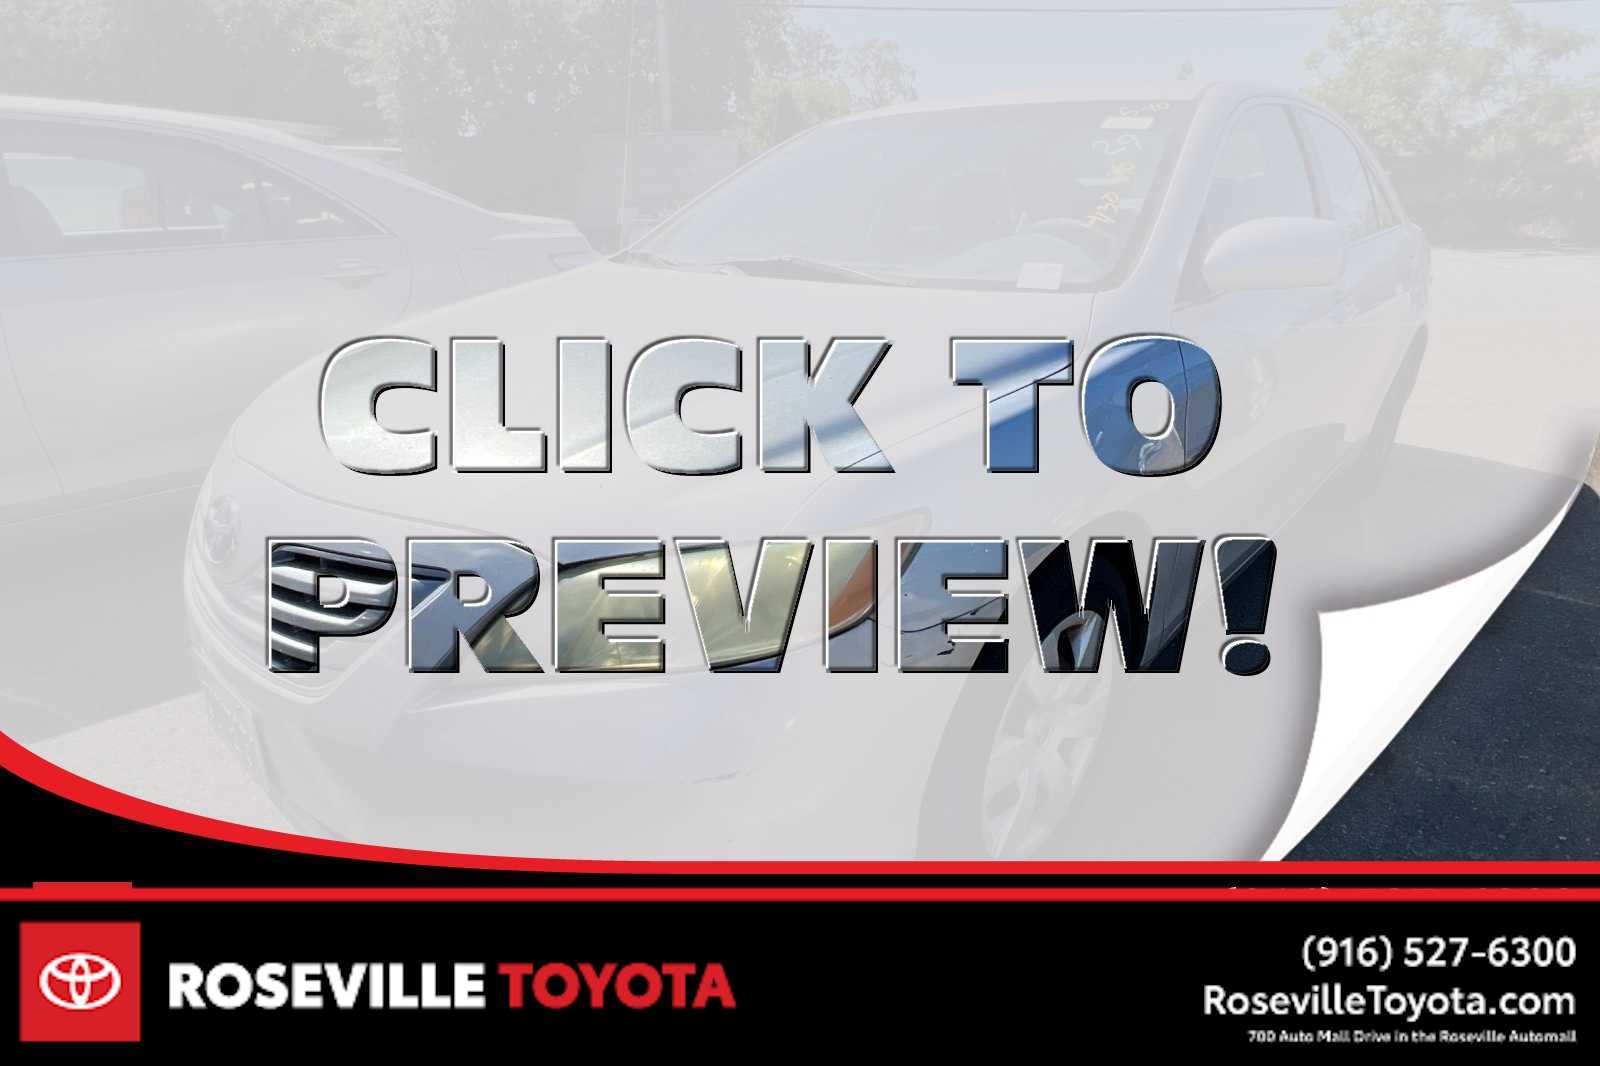 2007 Toyota Camry LE -
                Roseville, CA